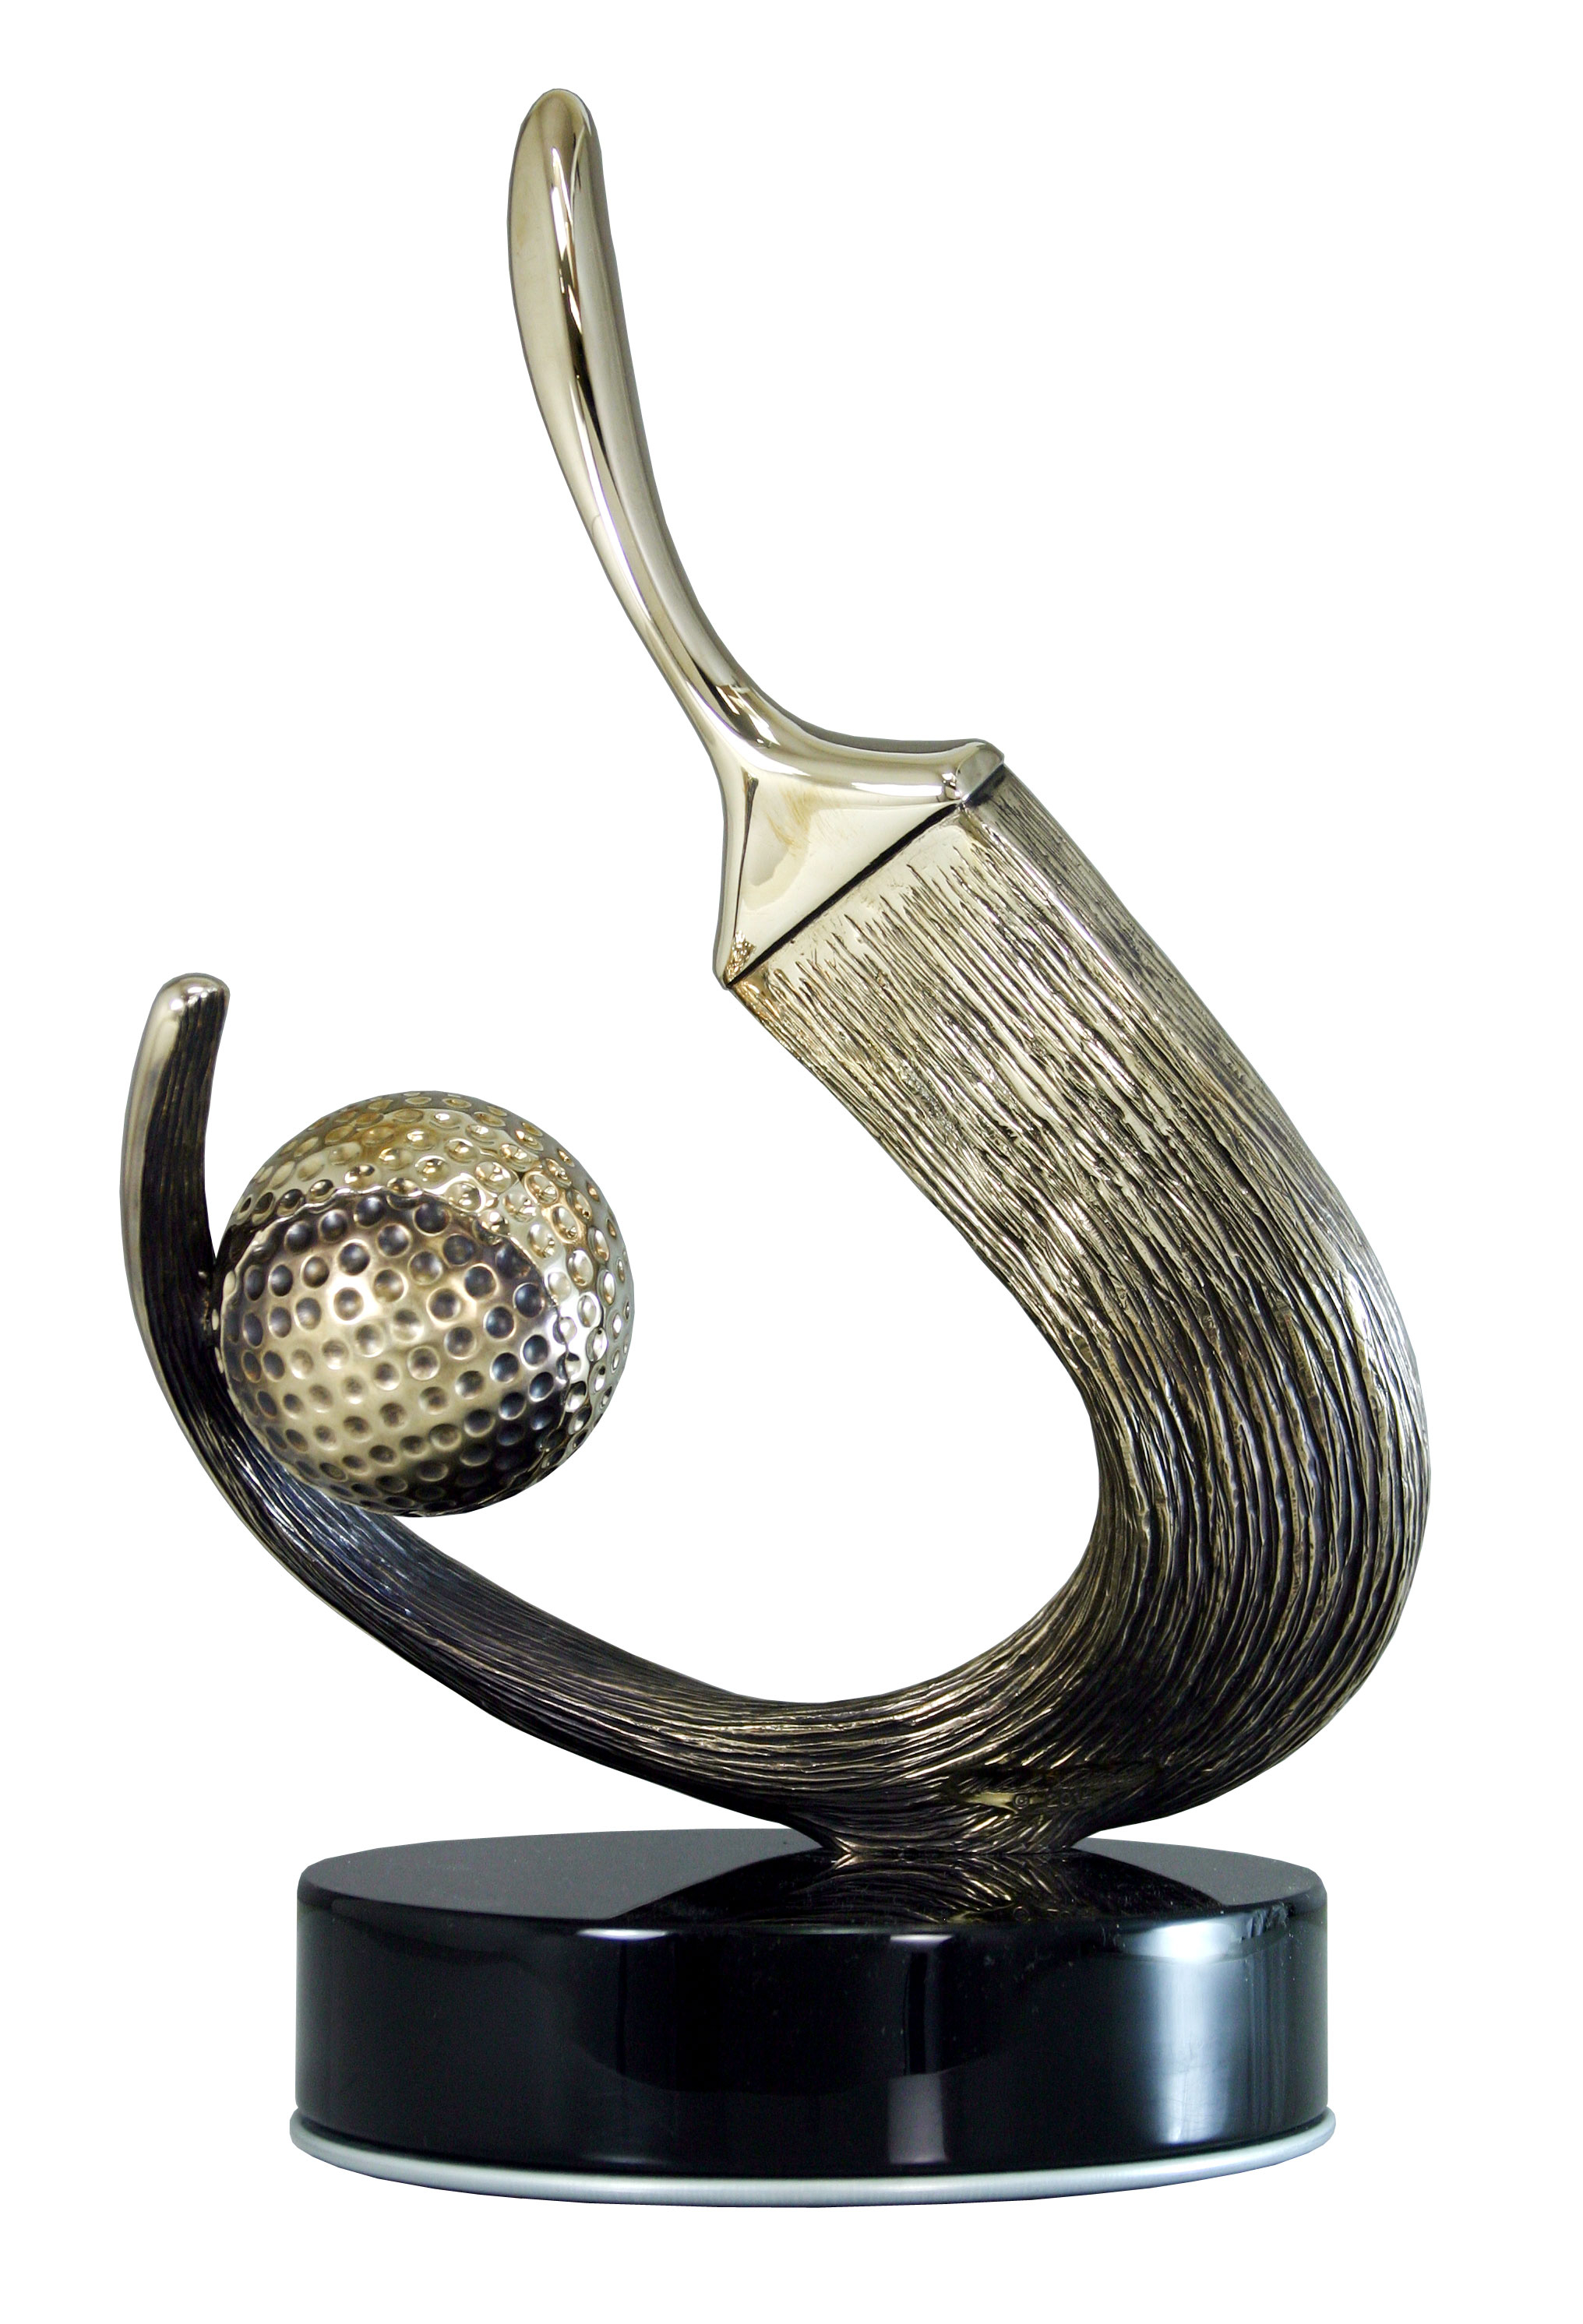 Valspar Championship Trophy made by Malcolm DeMille- Back View